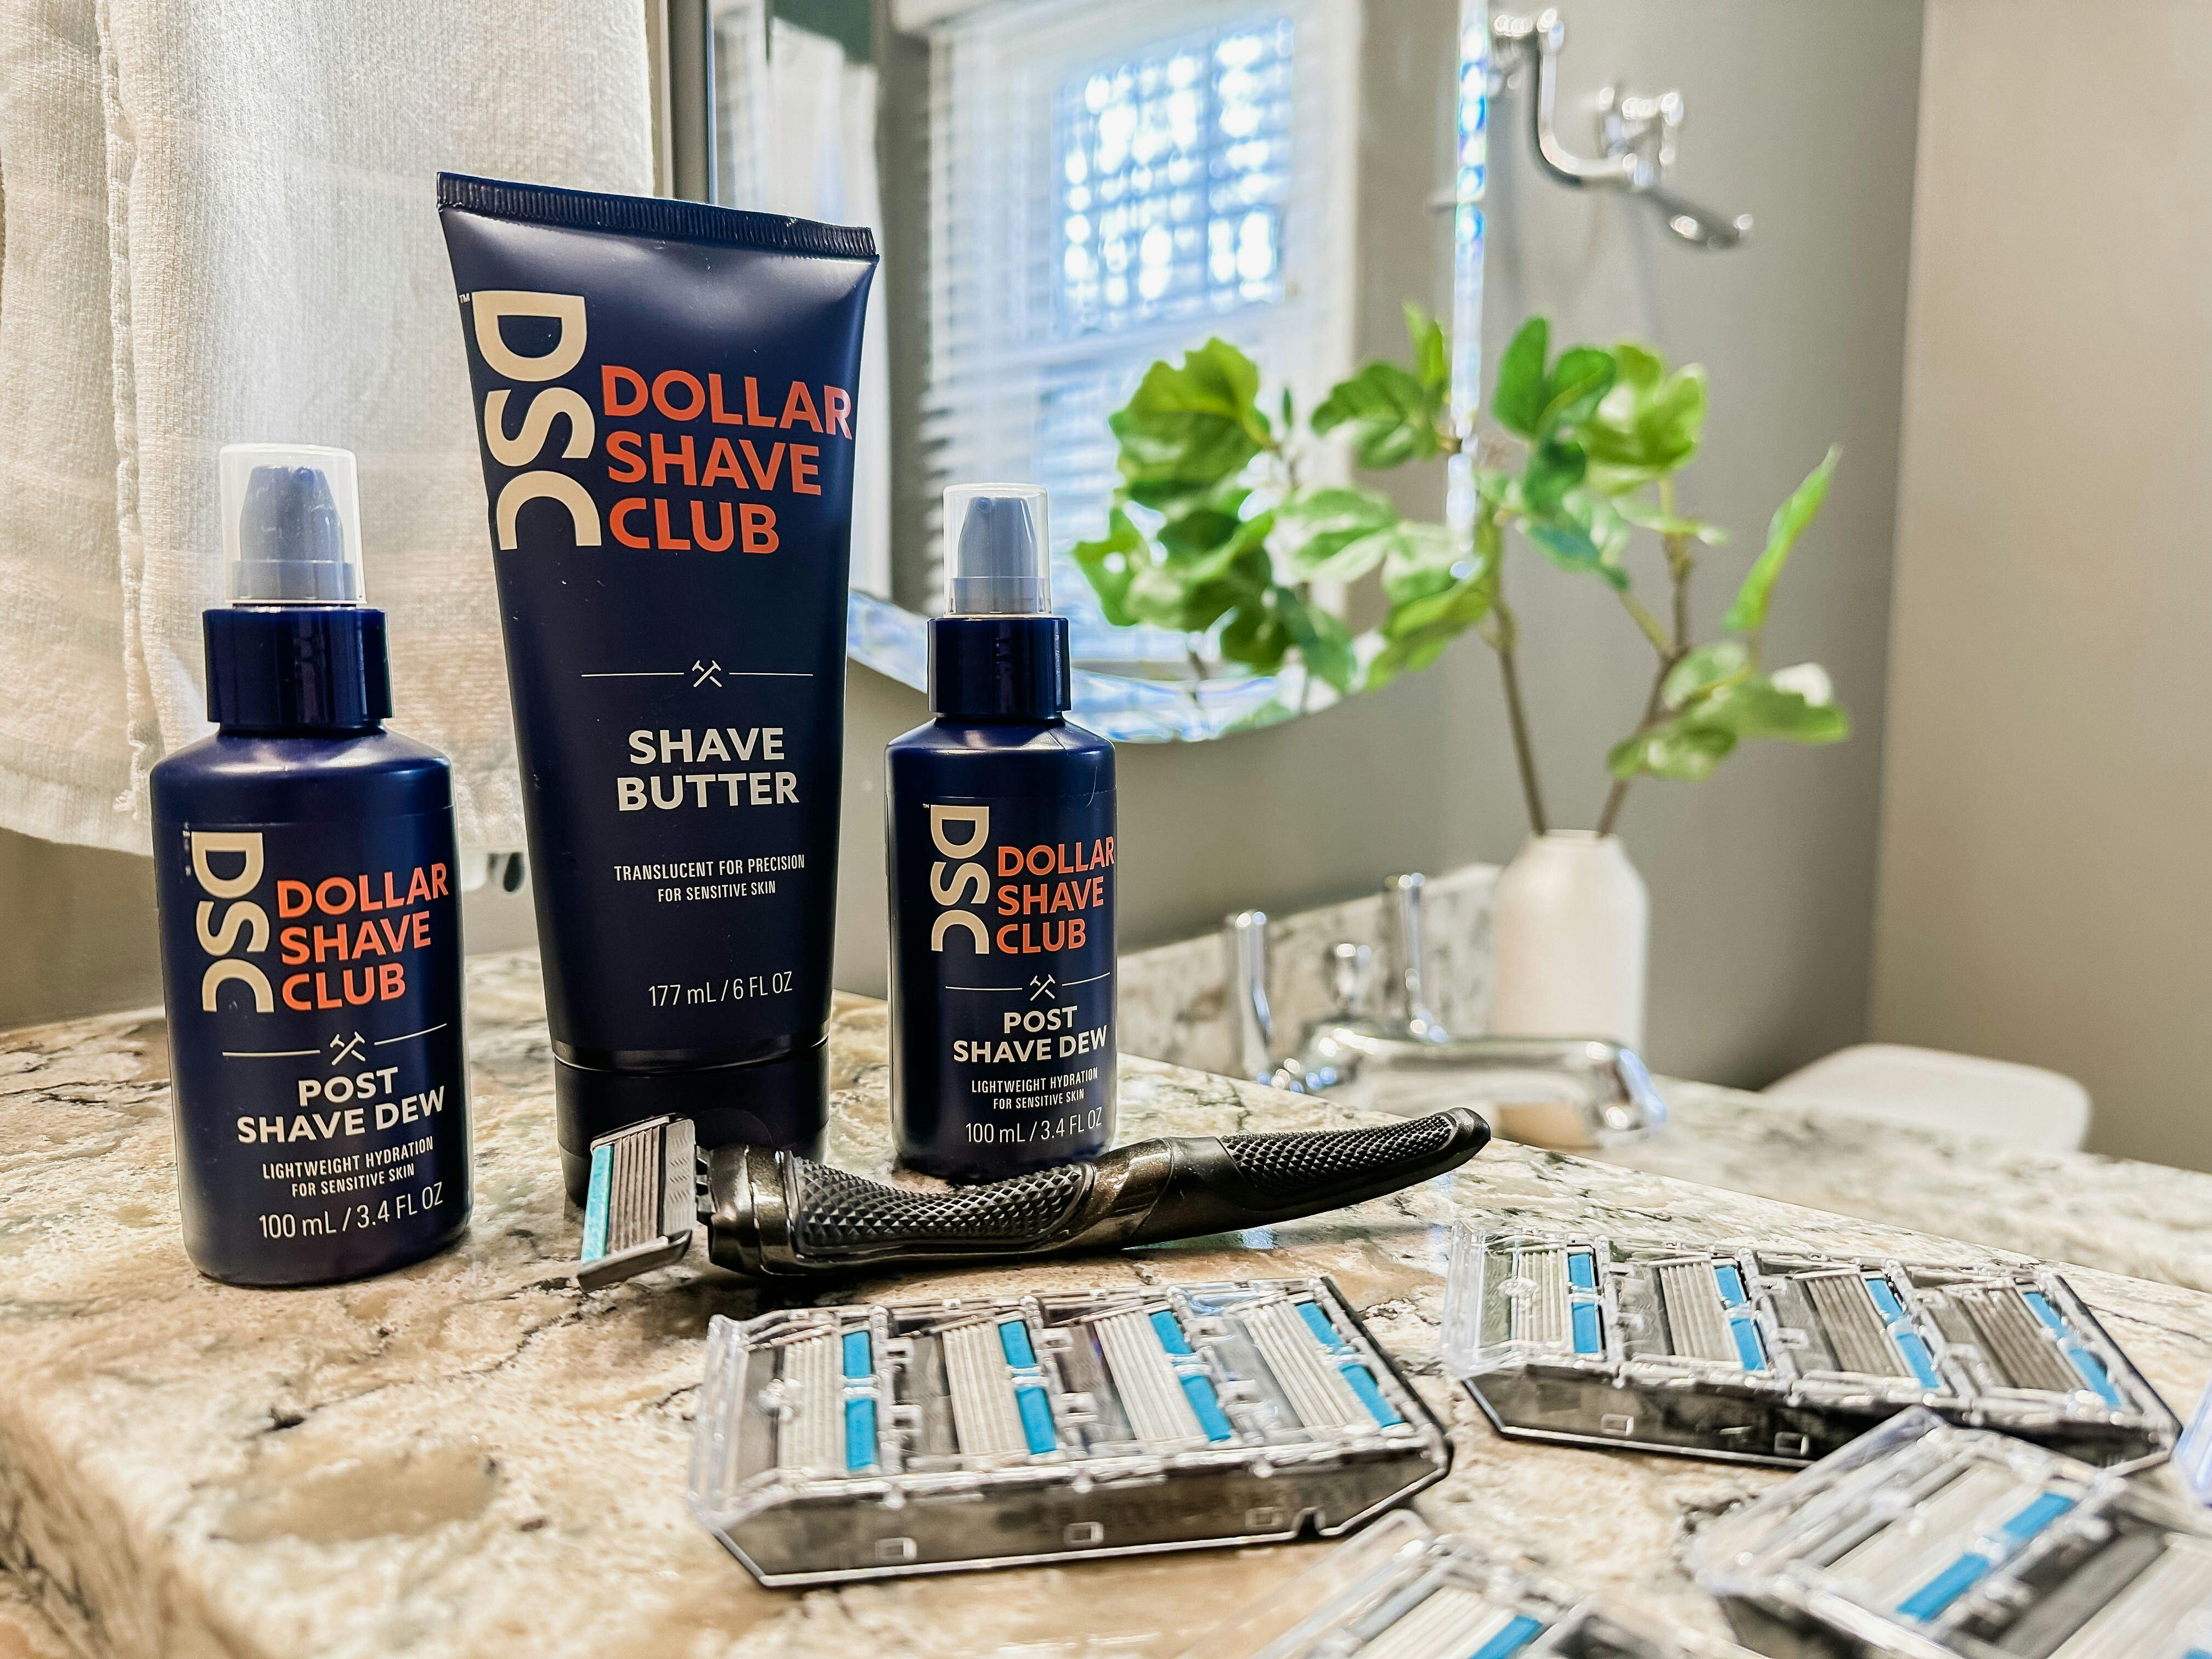 The Dollar Shave Club Shave Butter and two bottles of DSC Post Shave Dew lined up on the counter behind a handful of DSC razor cartridges